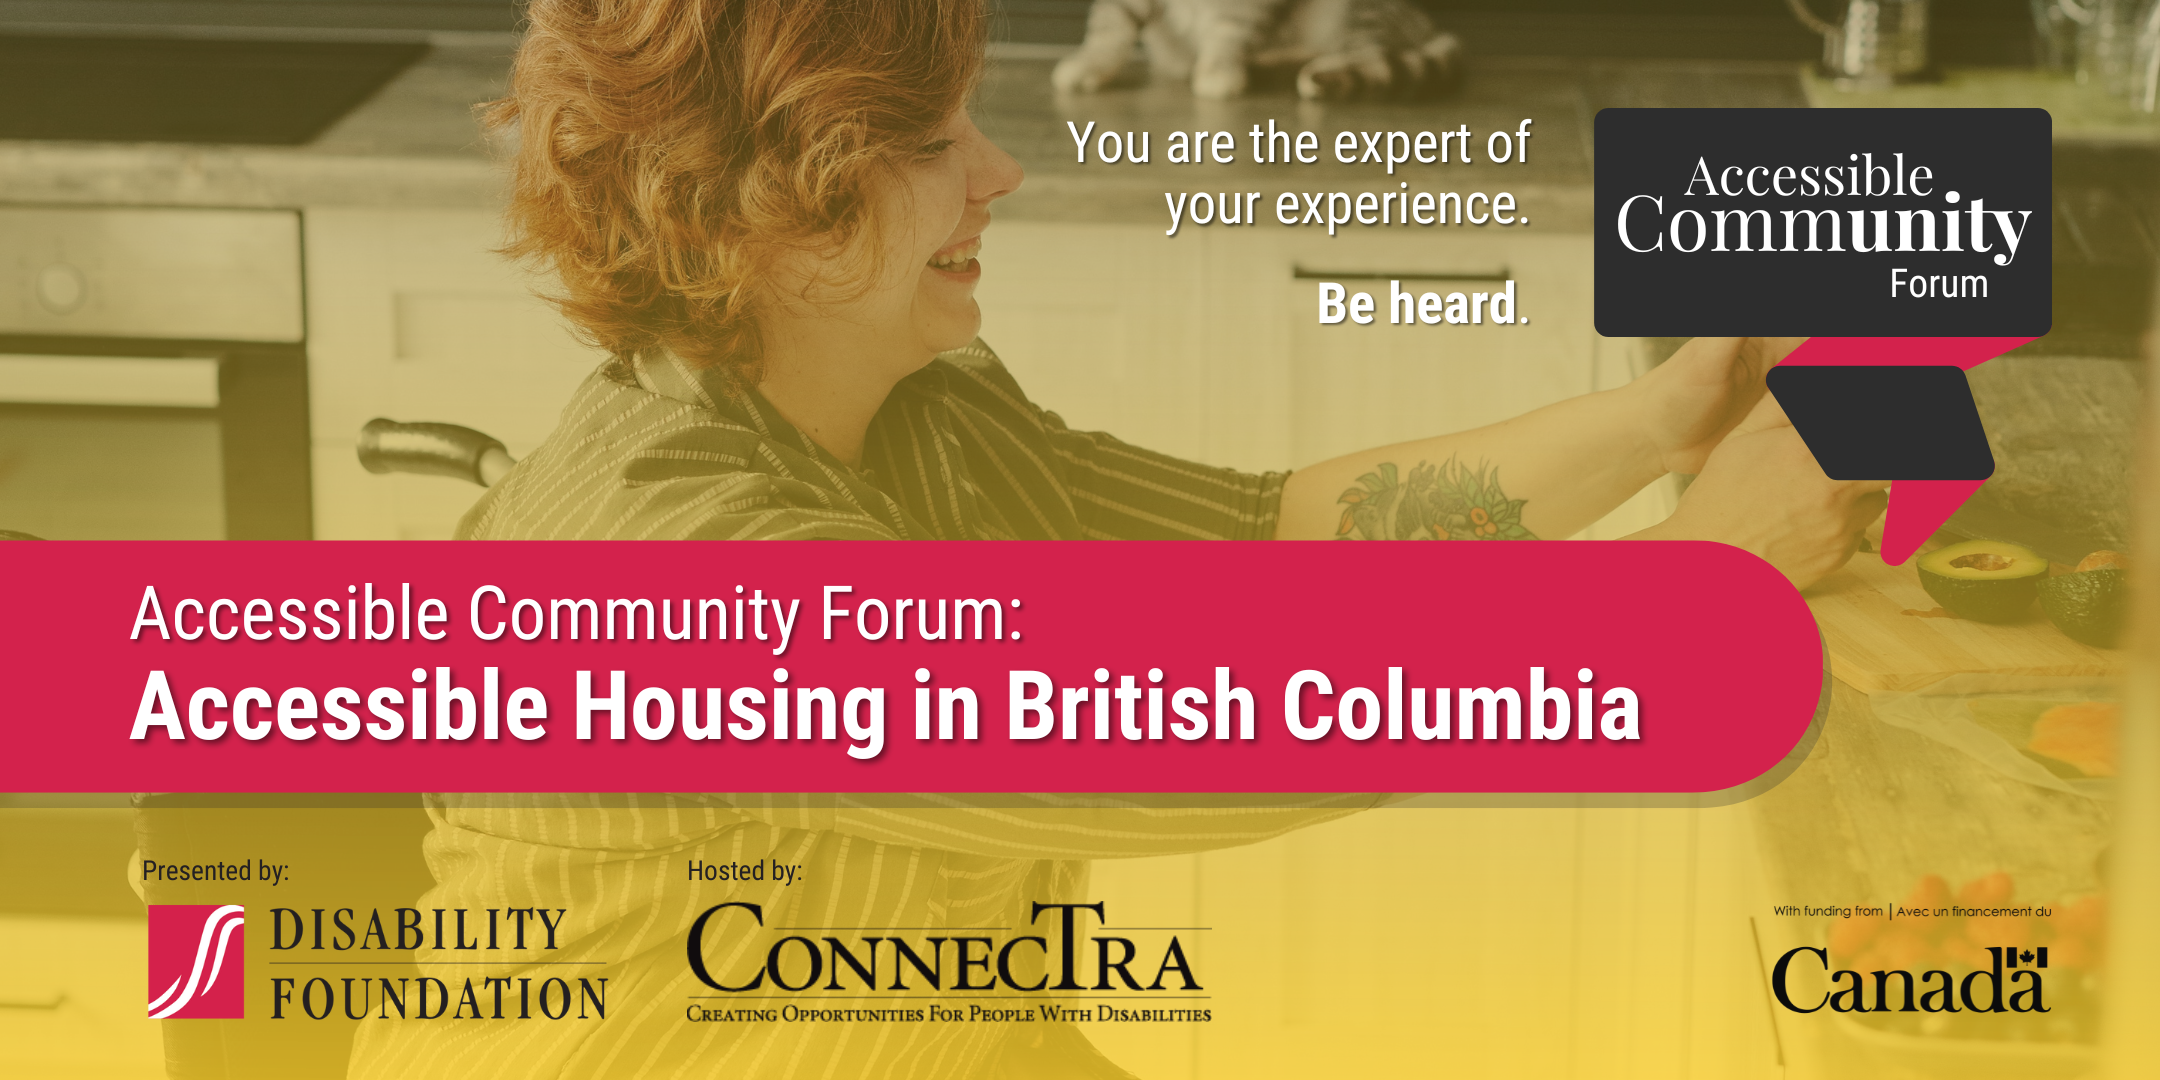 Accessible Community Forum: Accessible Housing in British Columbia.